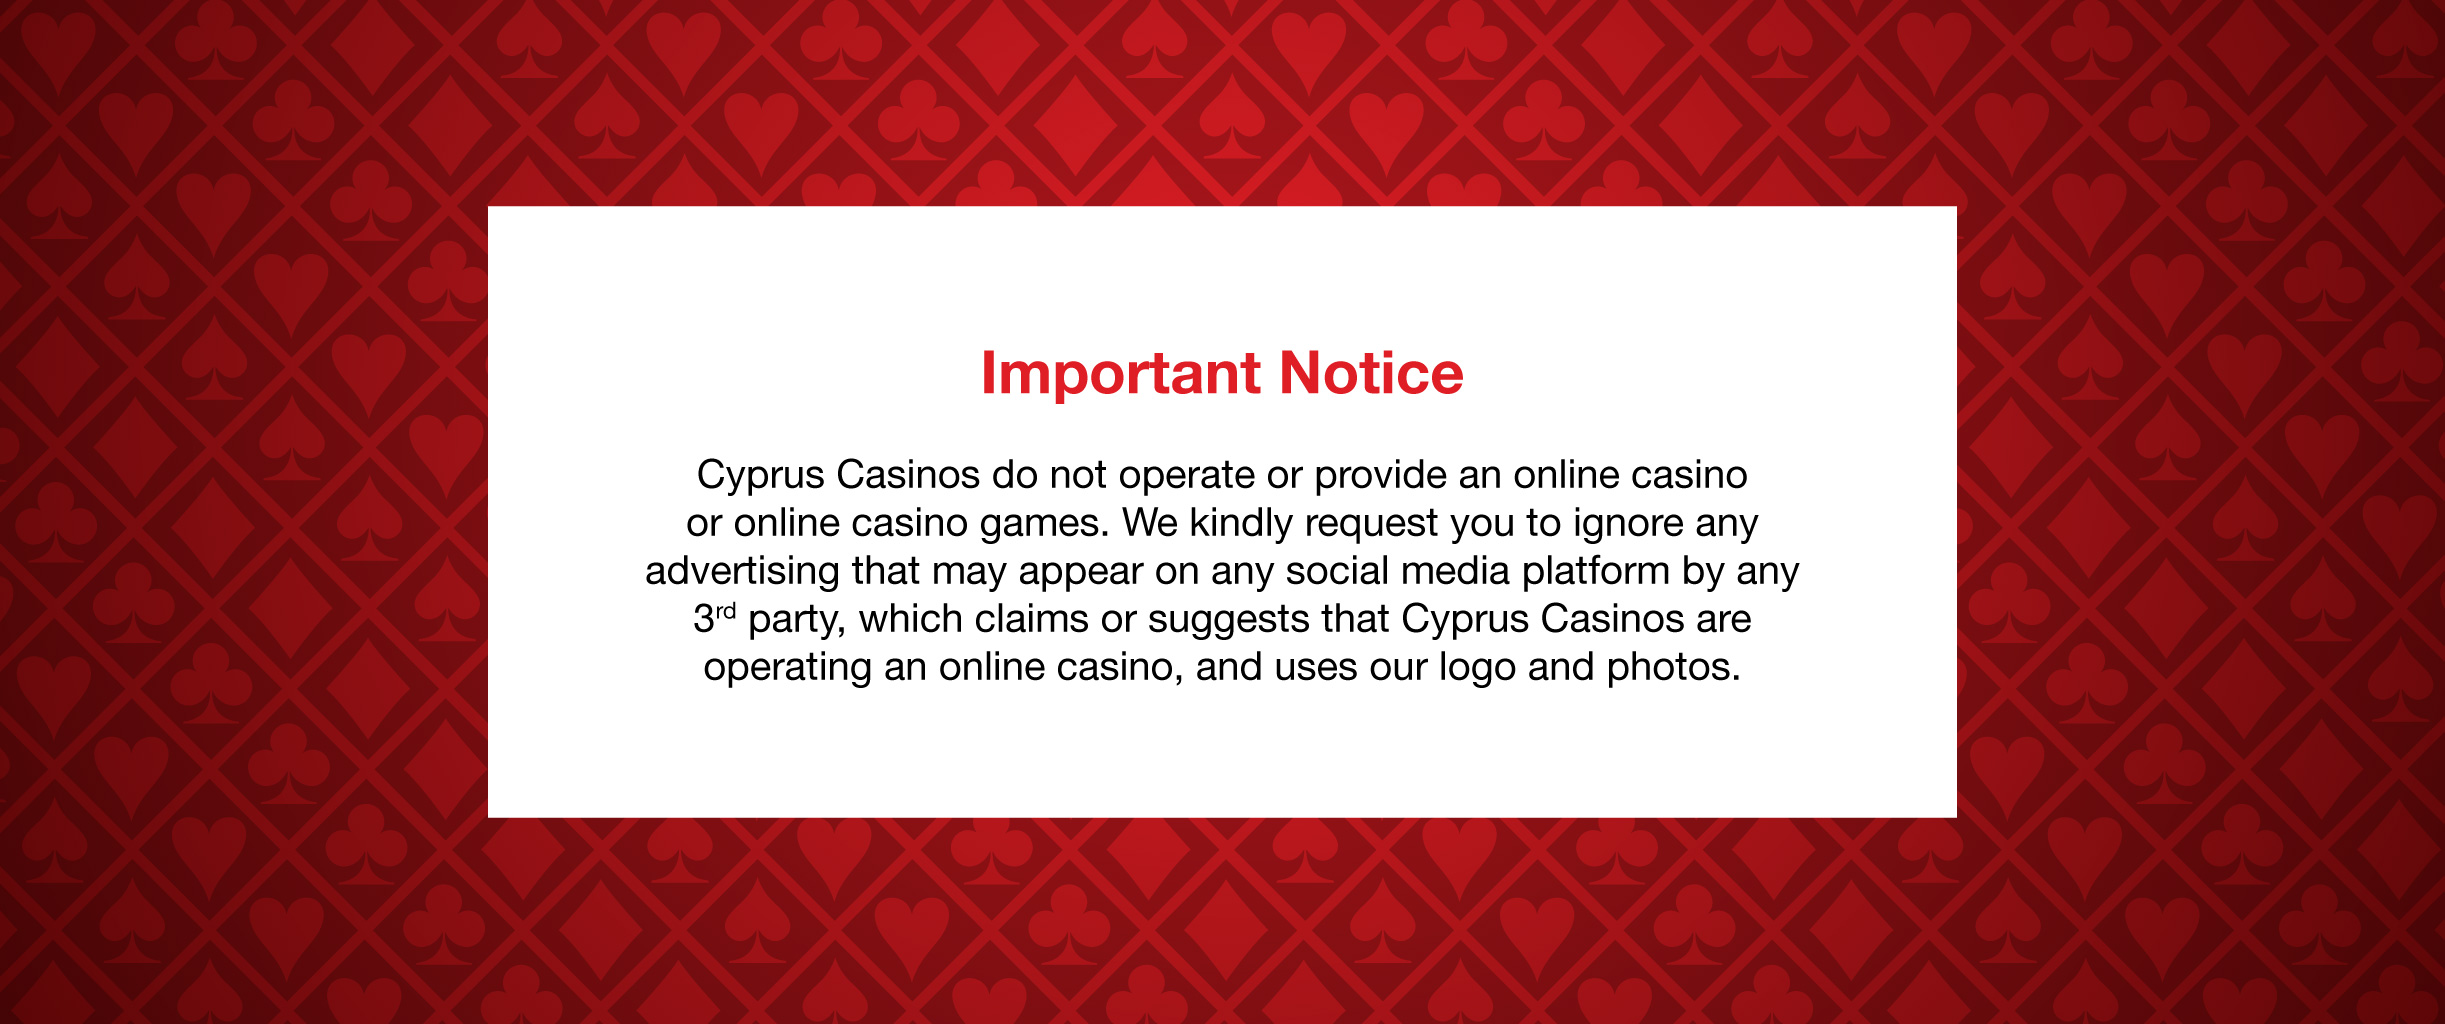 Never Suffer From online casino in Cyprus Again